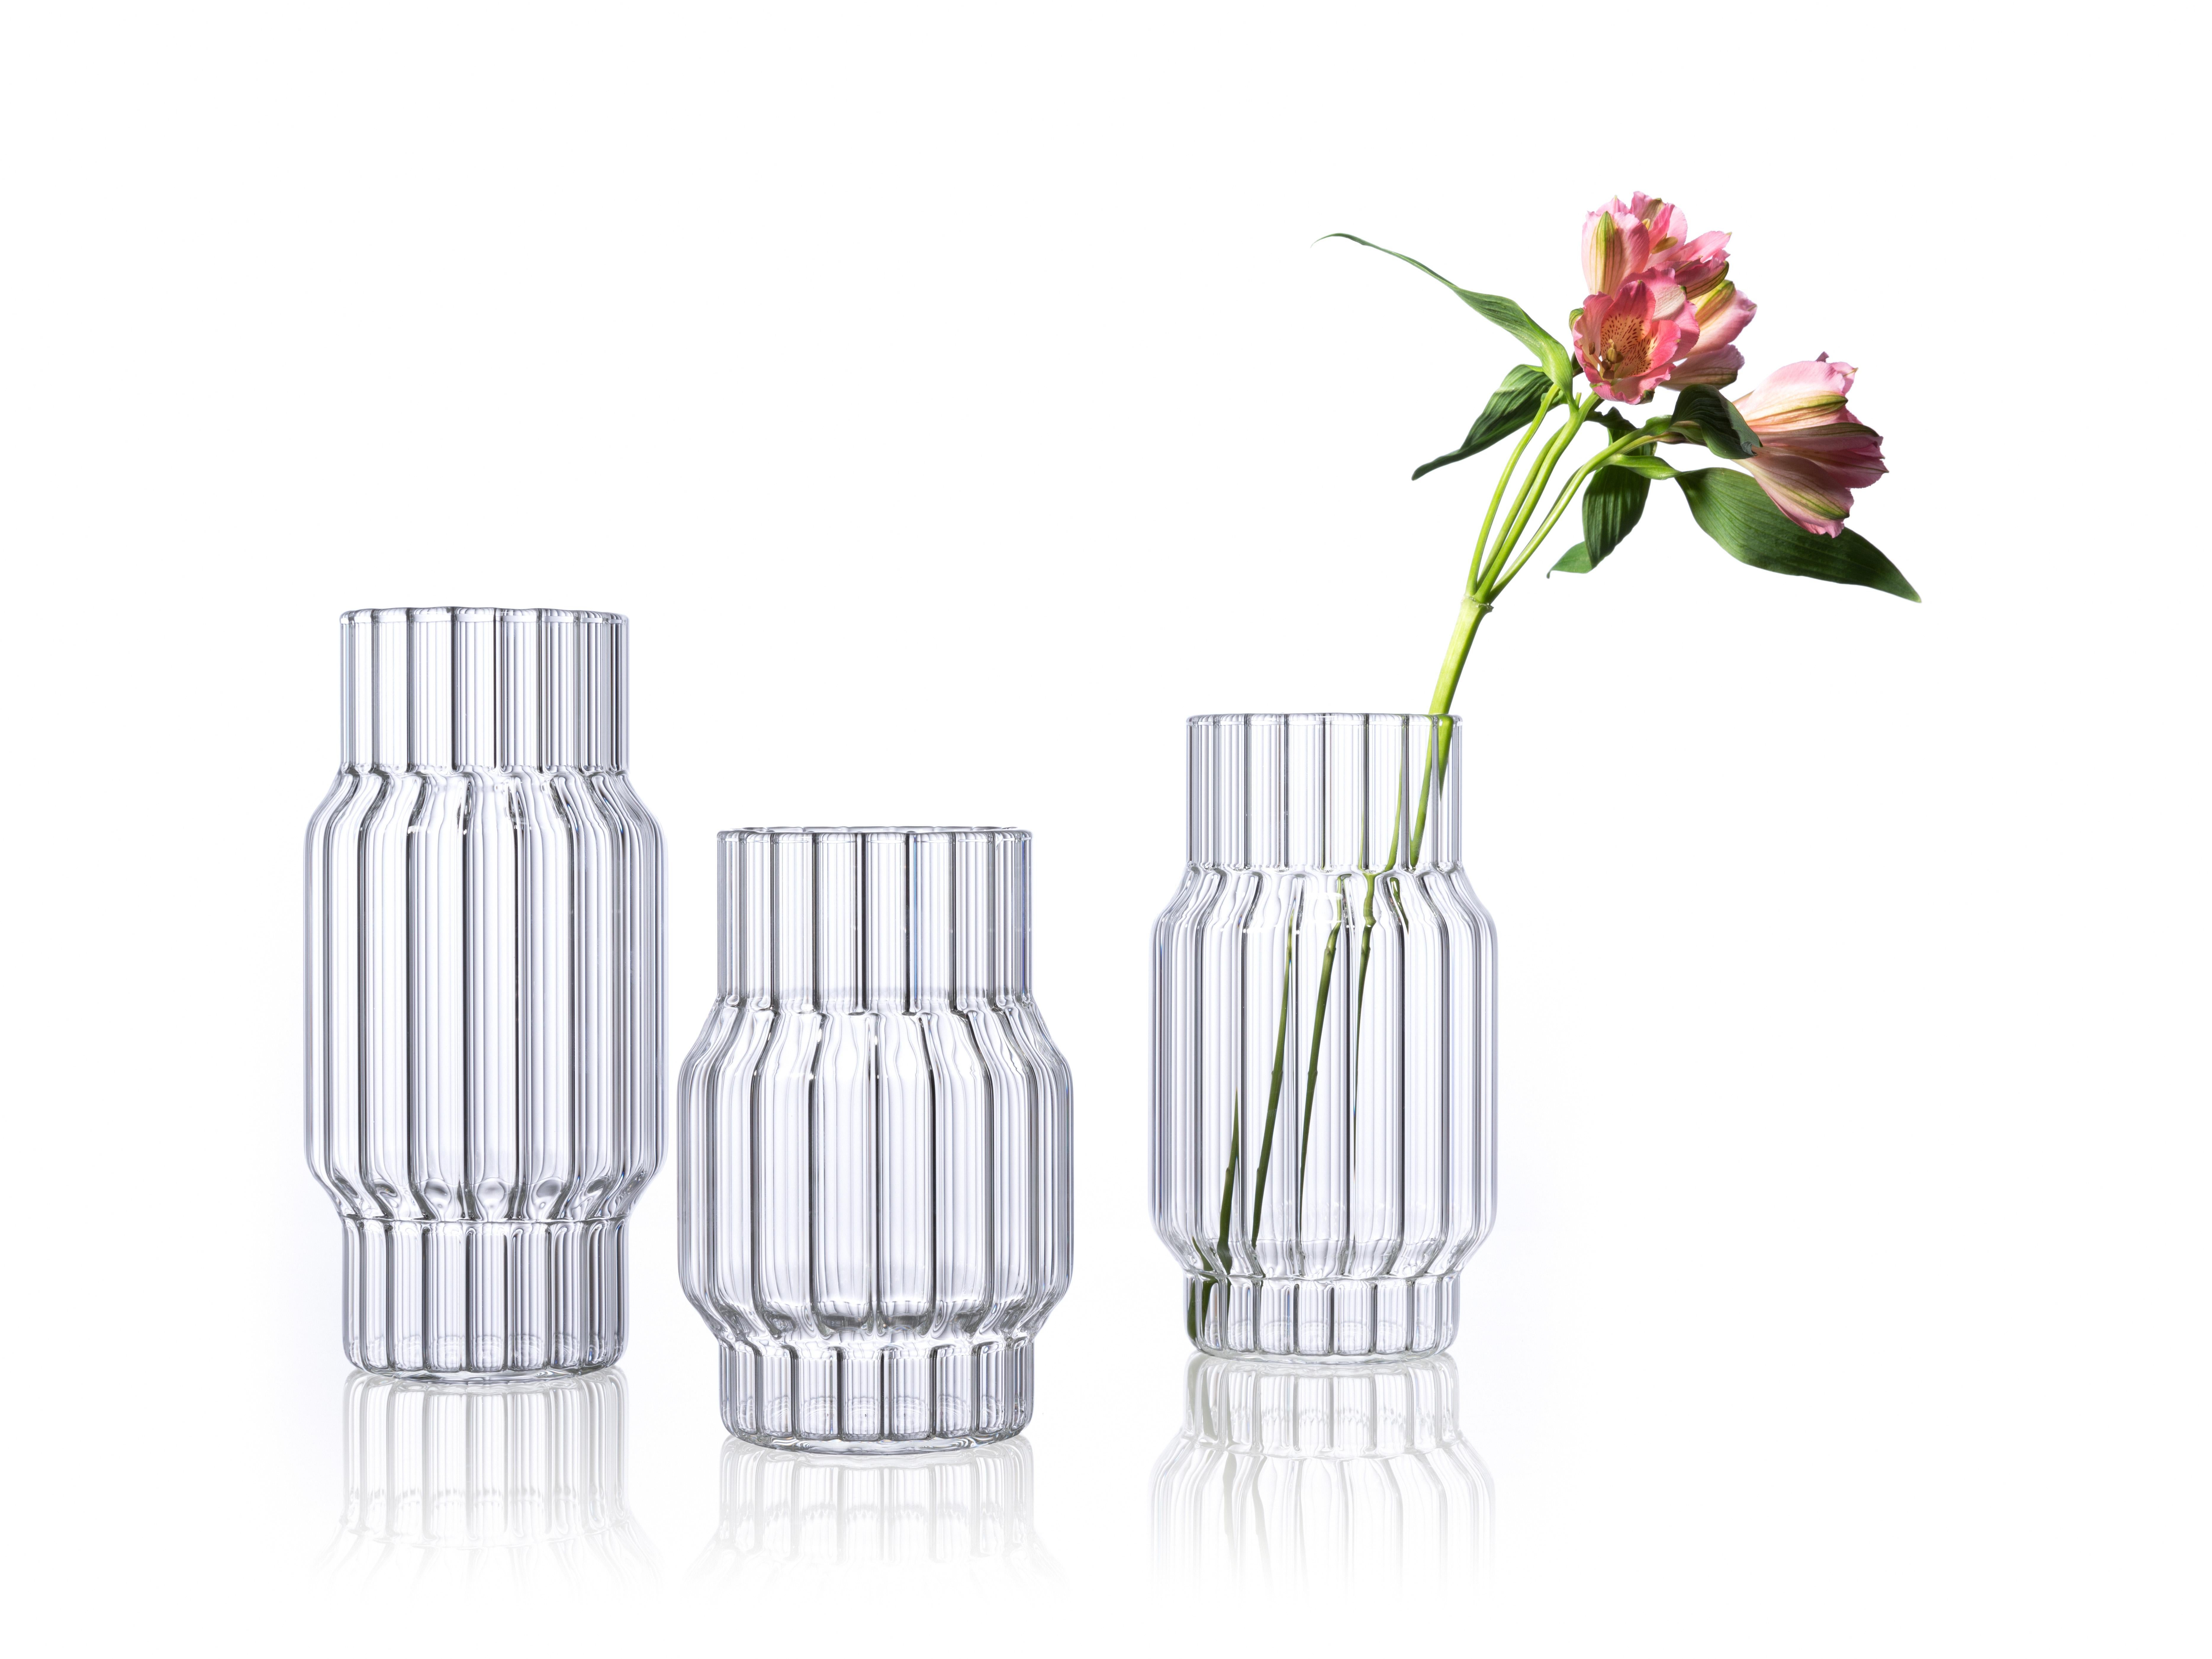 Albany Small, Medium & Large Vases - Set of 3 Glass

This set of 3 designer vases looks beautiful together or alone and makes an eye-catching addition to any shelf or table in your home. 

The Albany Vase inverts tradition with intricate fluting